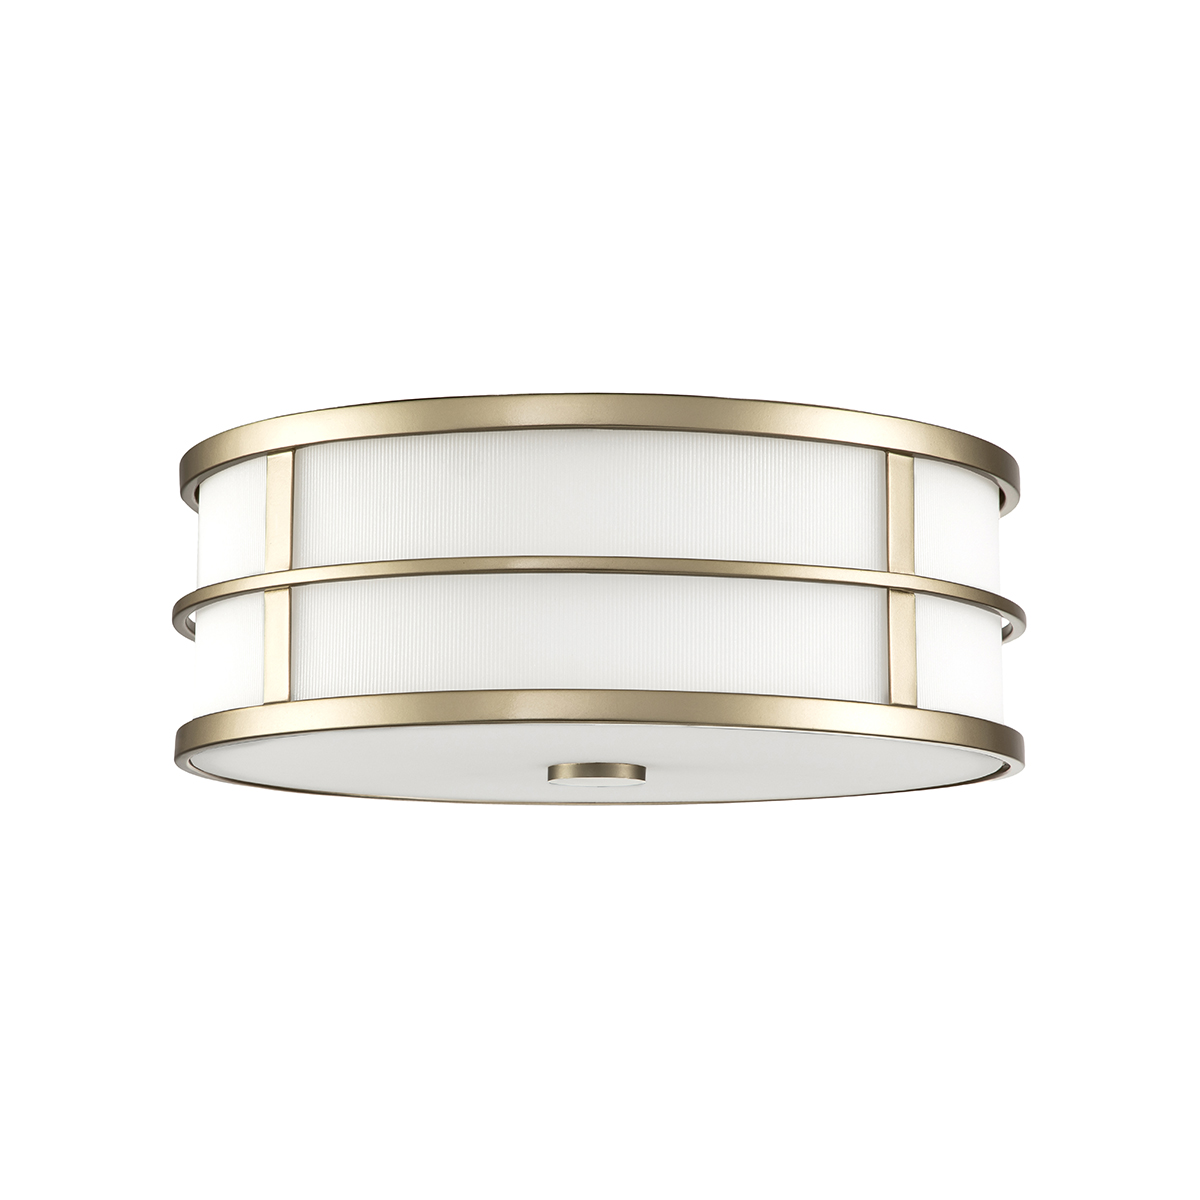 FUSION brass FE-FUSION-F-PNBR Feiss